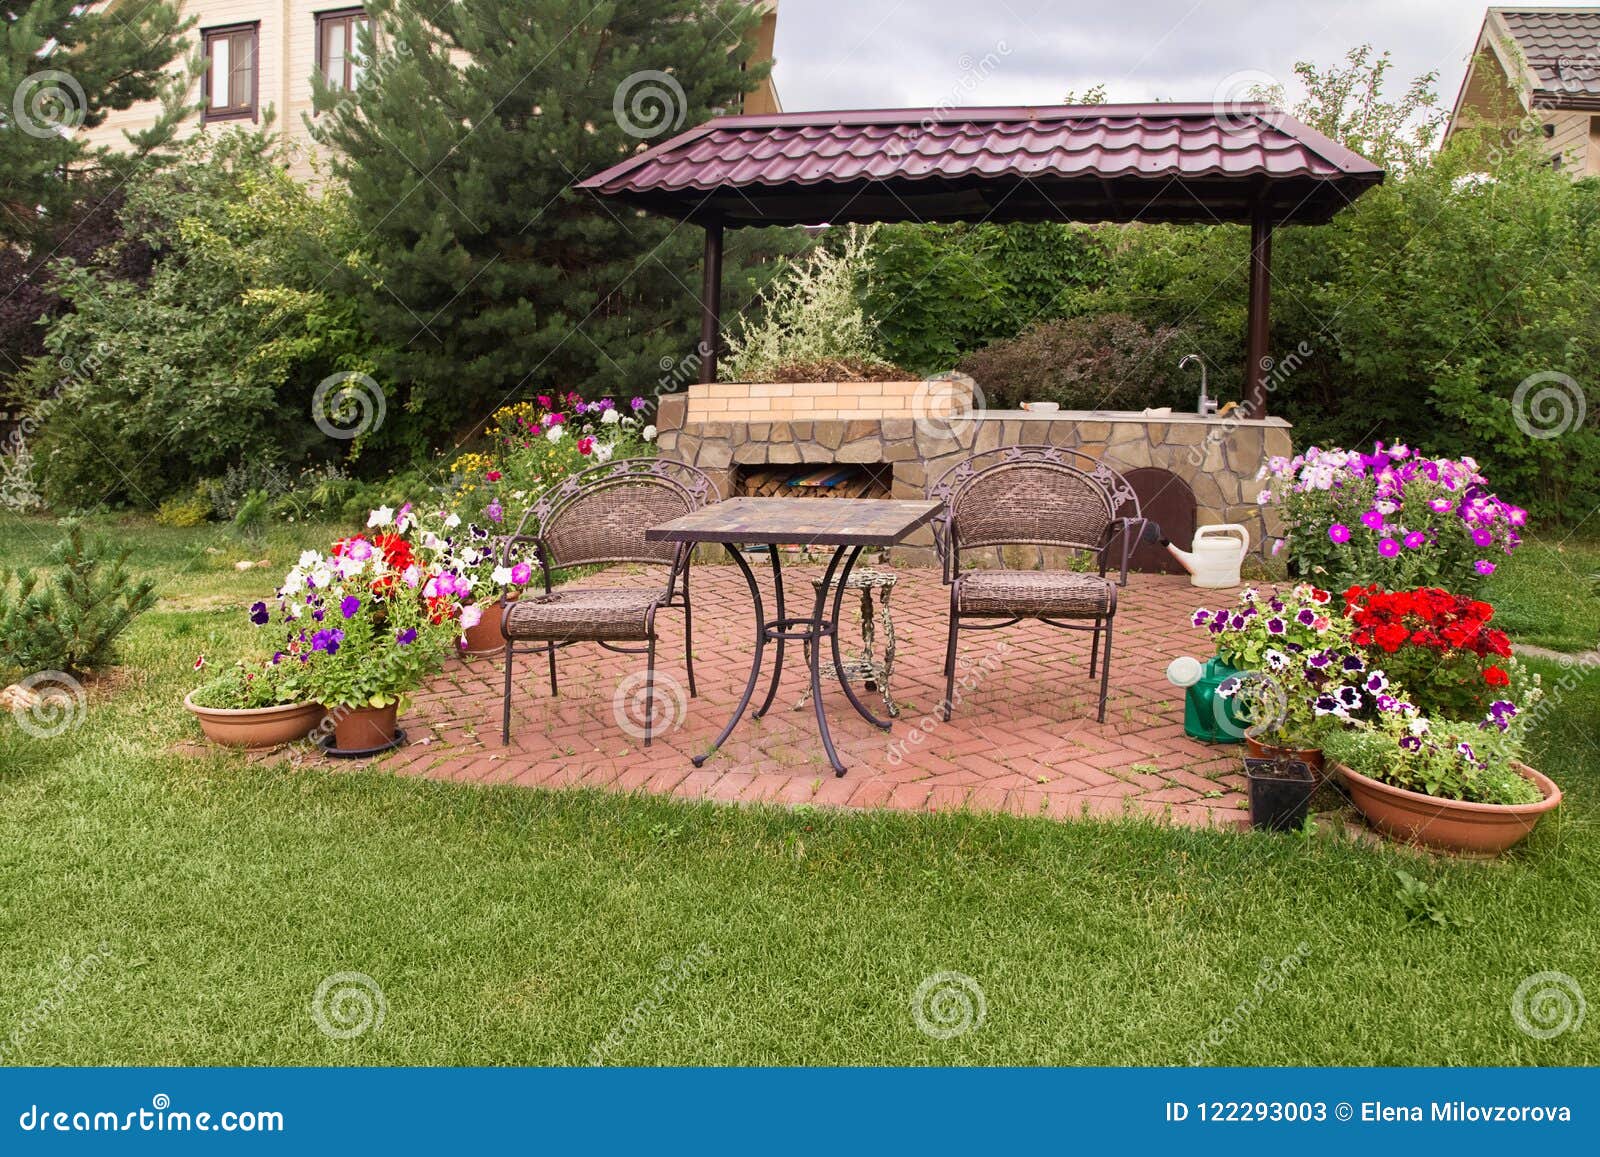 Backyard Patio Area With Stone Fireplace Stock Image Image Of Modern Chairs 122293003